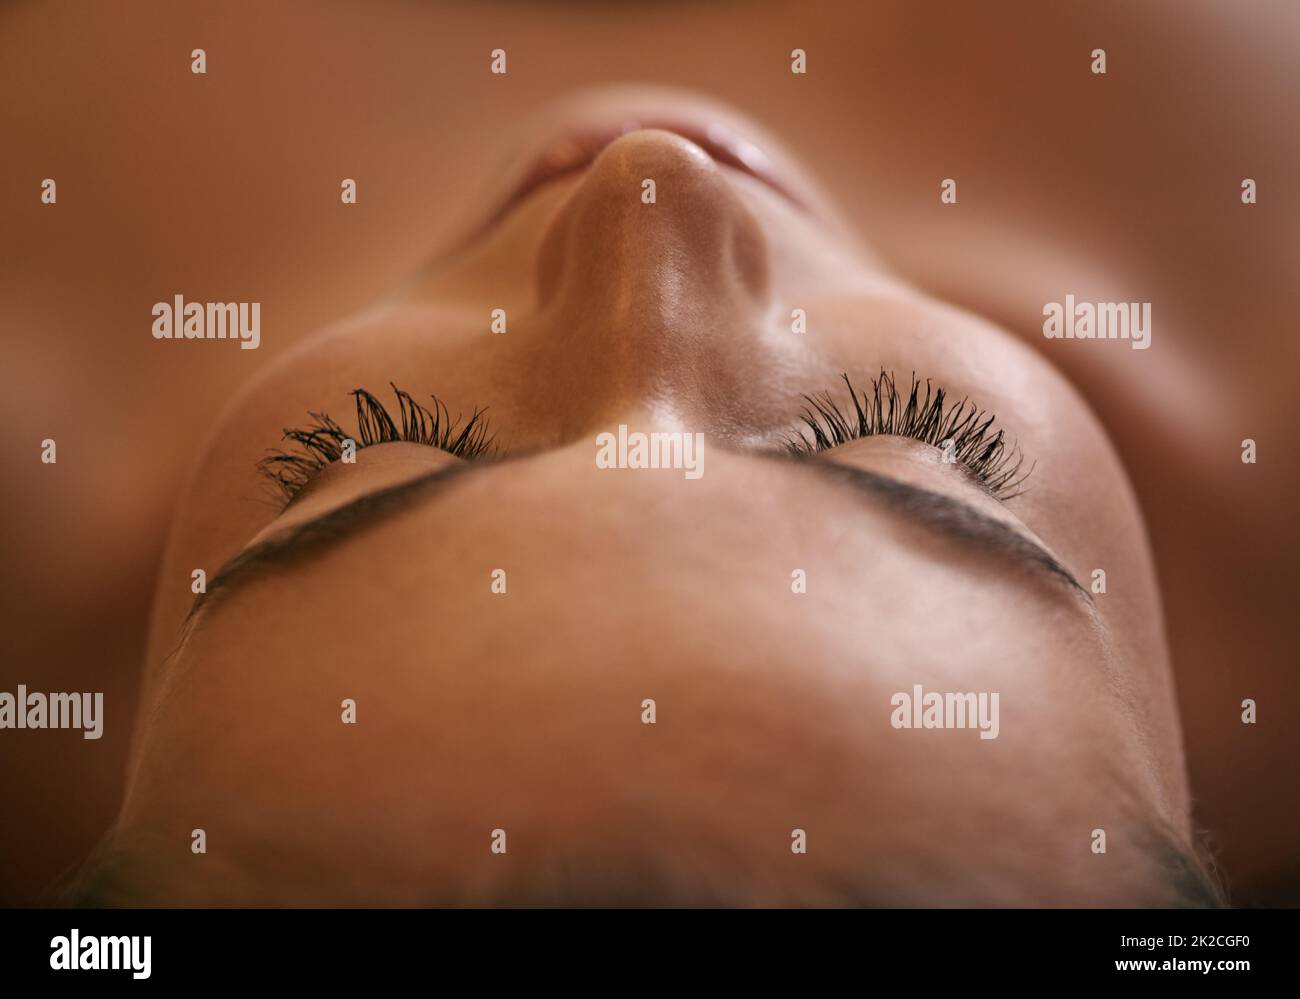 Total relaxation. Closeup of a young womans face during a massage. Stock Photo